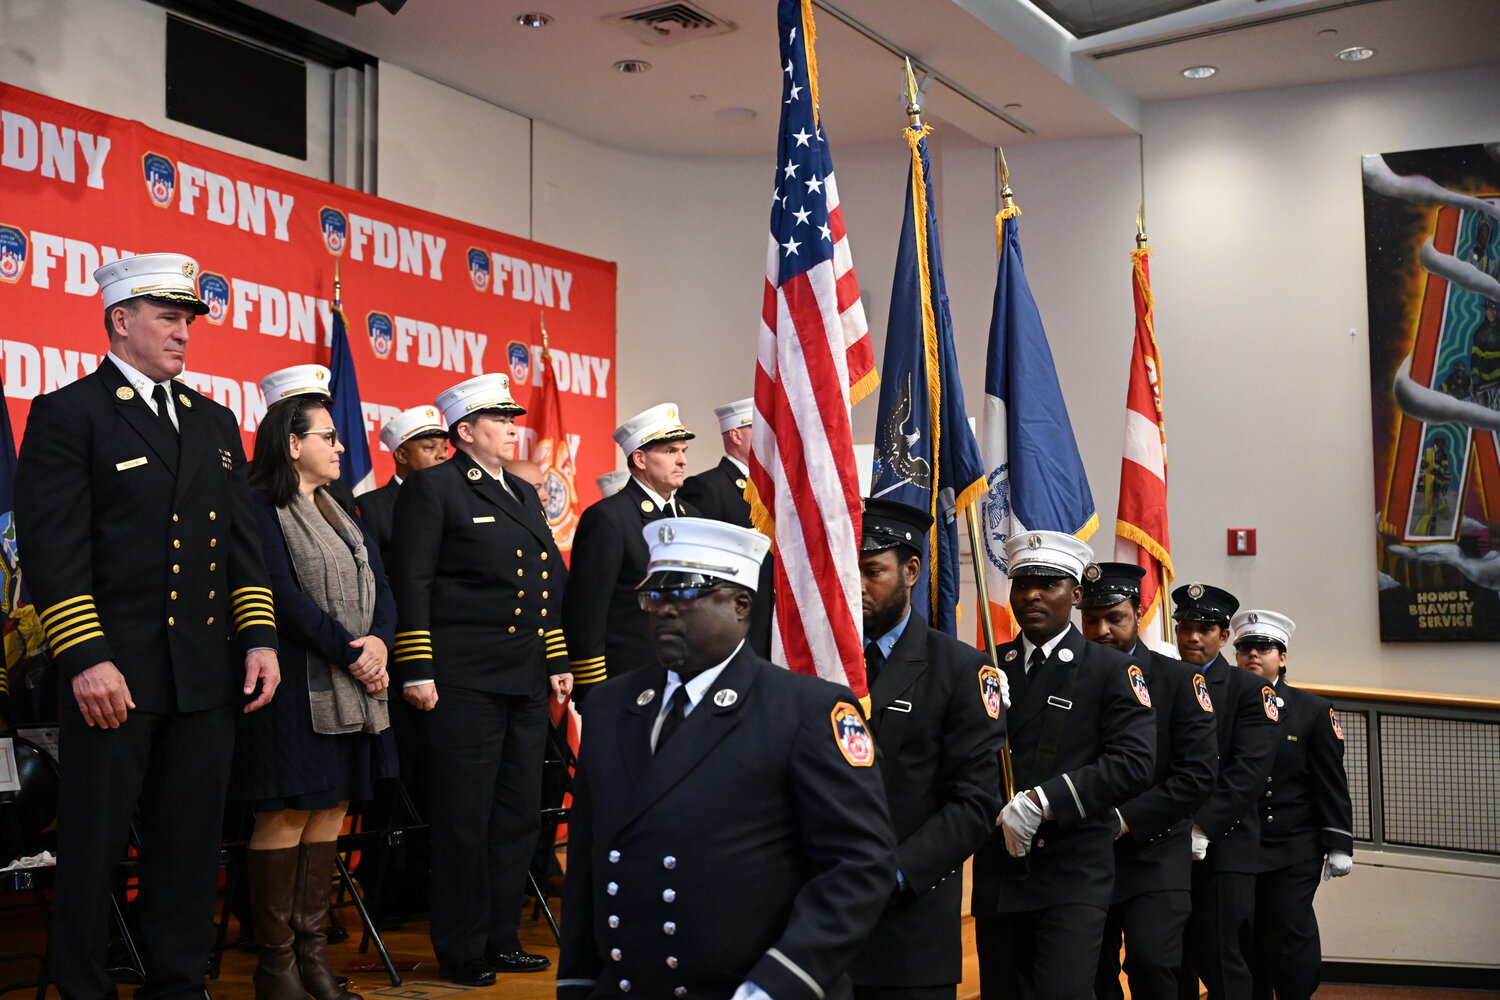 FDNY fire protection inspectors are now eligible, for the first time, to take the promotional exam to become a firefighter. The Department of Citywide Administrative Services expanded the eligibility for next year’s test beyond members of FDNY EMS to include both the inspectors and the FDNY’s fire alarm dispatchers.